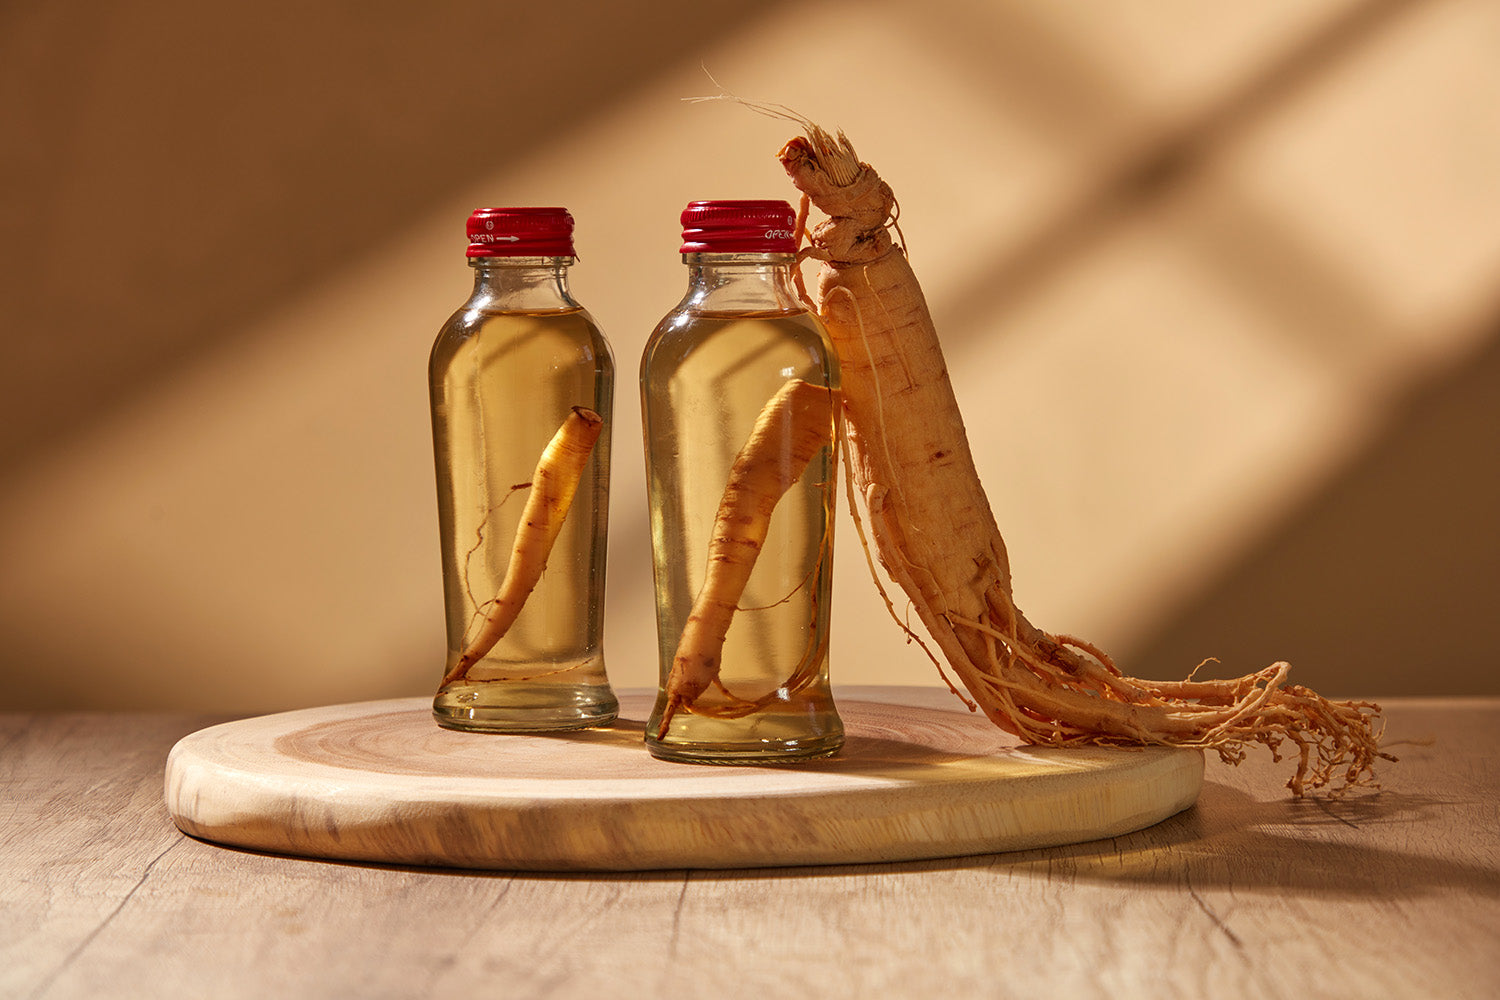 Red Ginseng: "Miracle Root"